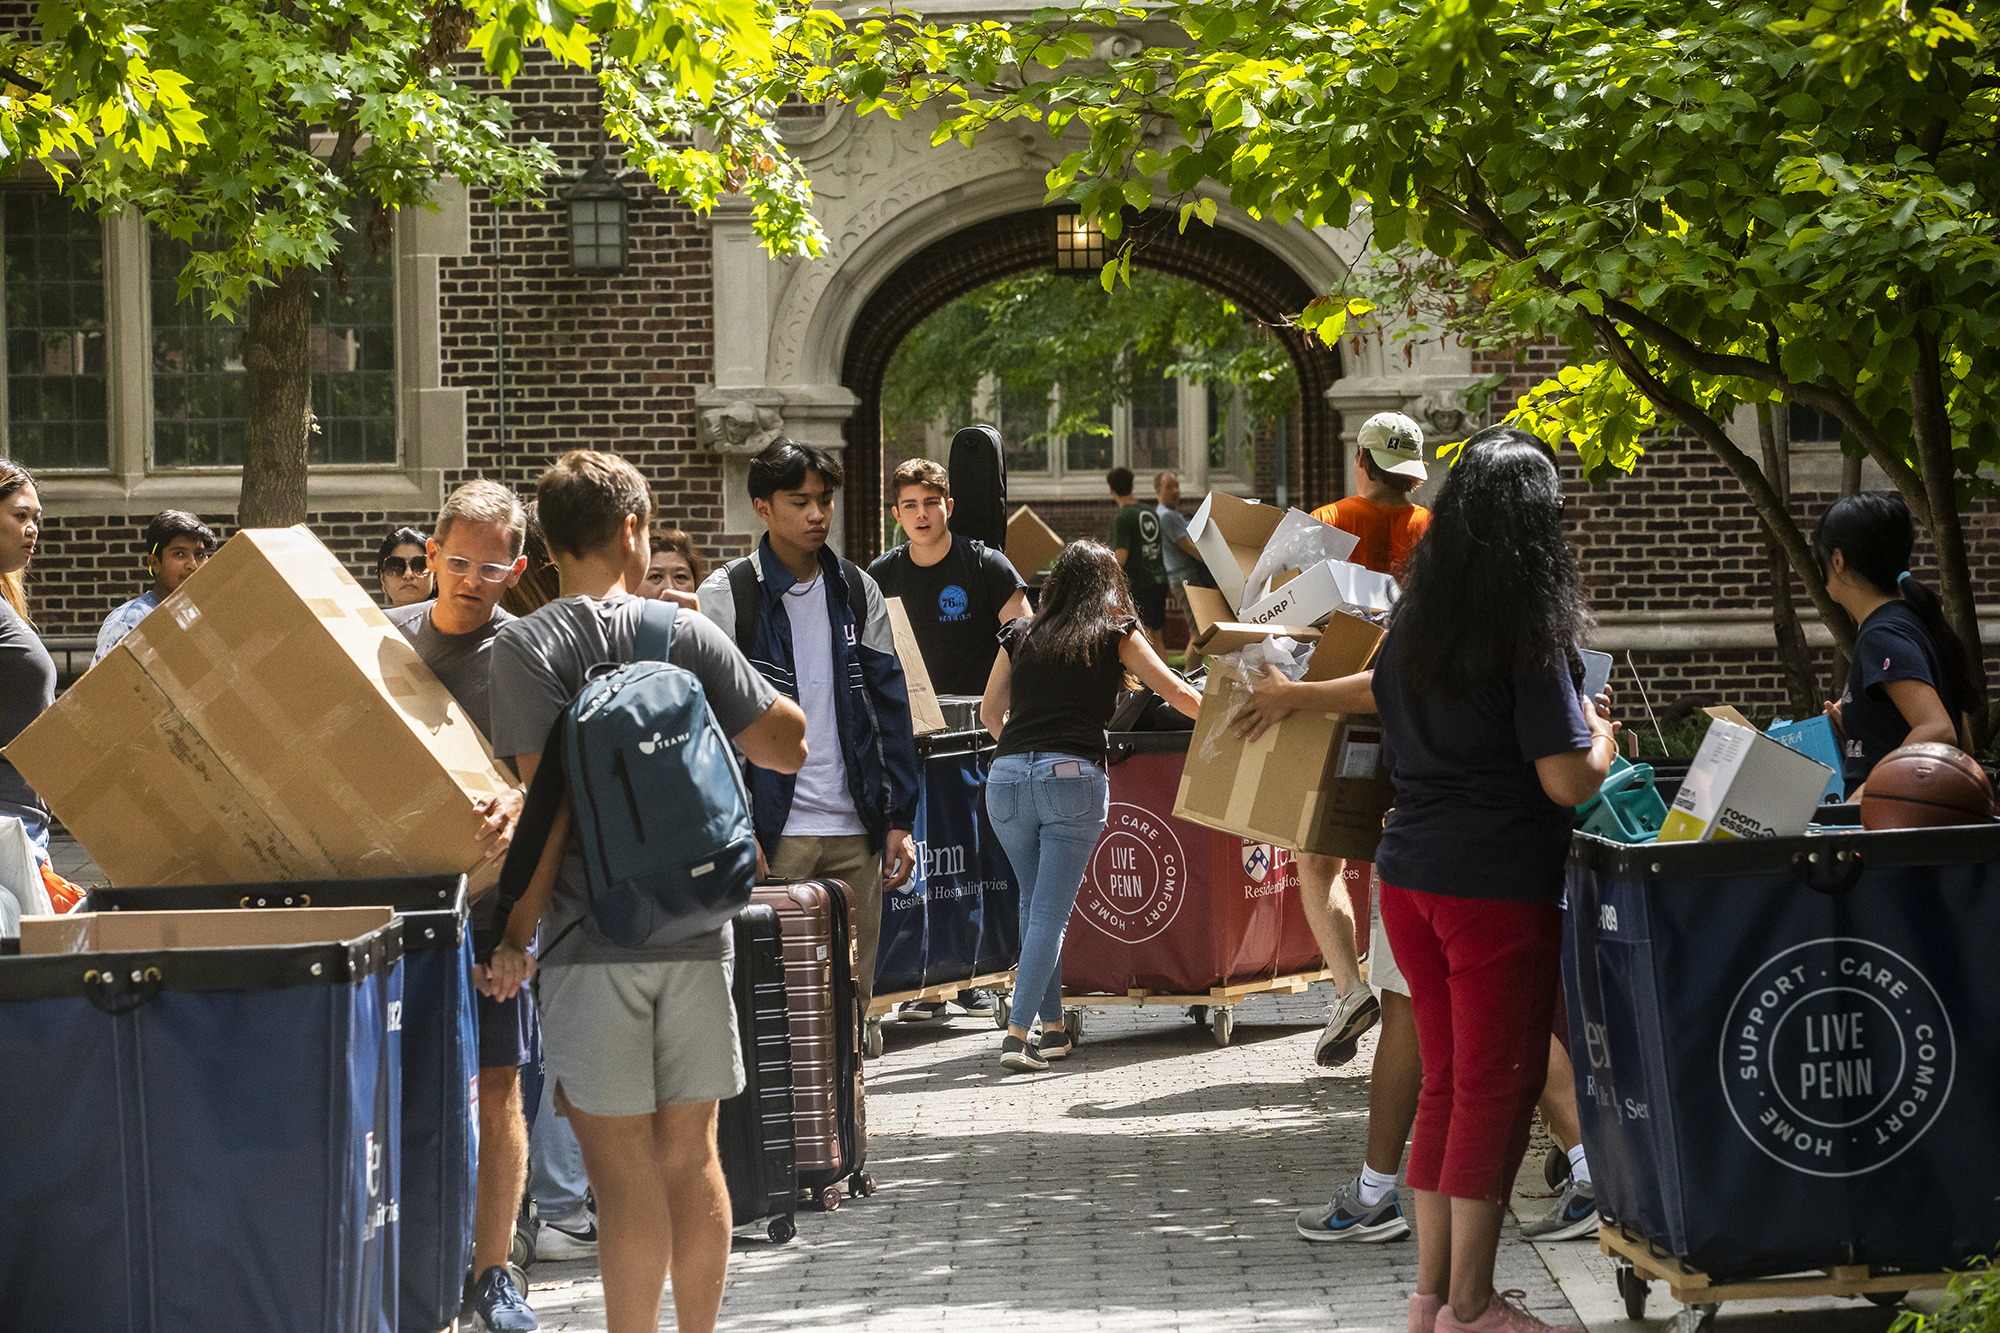 carts fill the quad during move in day at penn